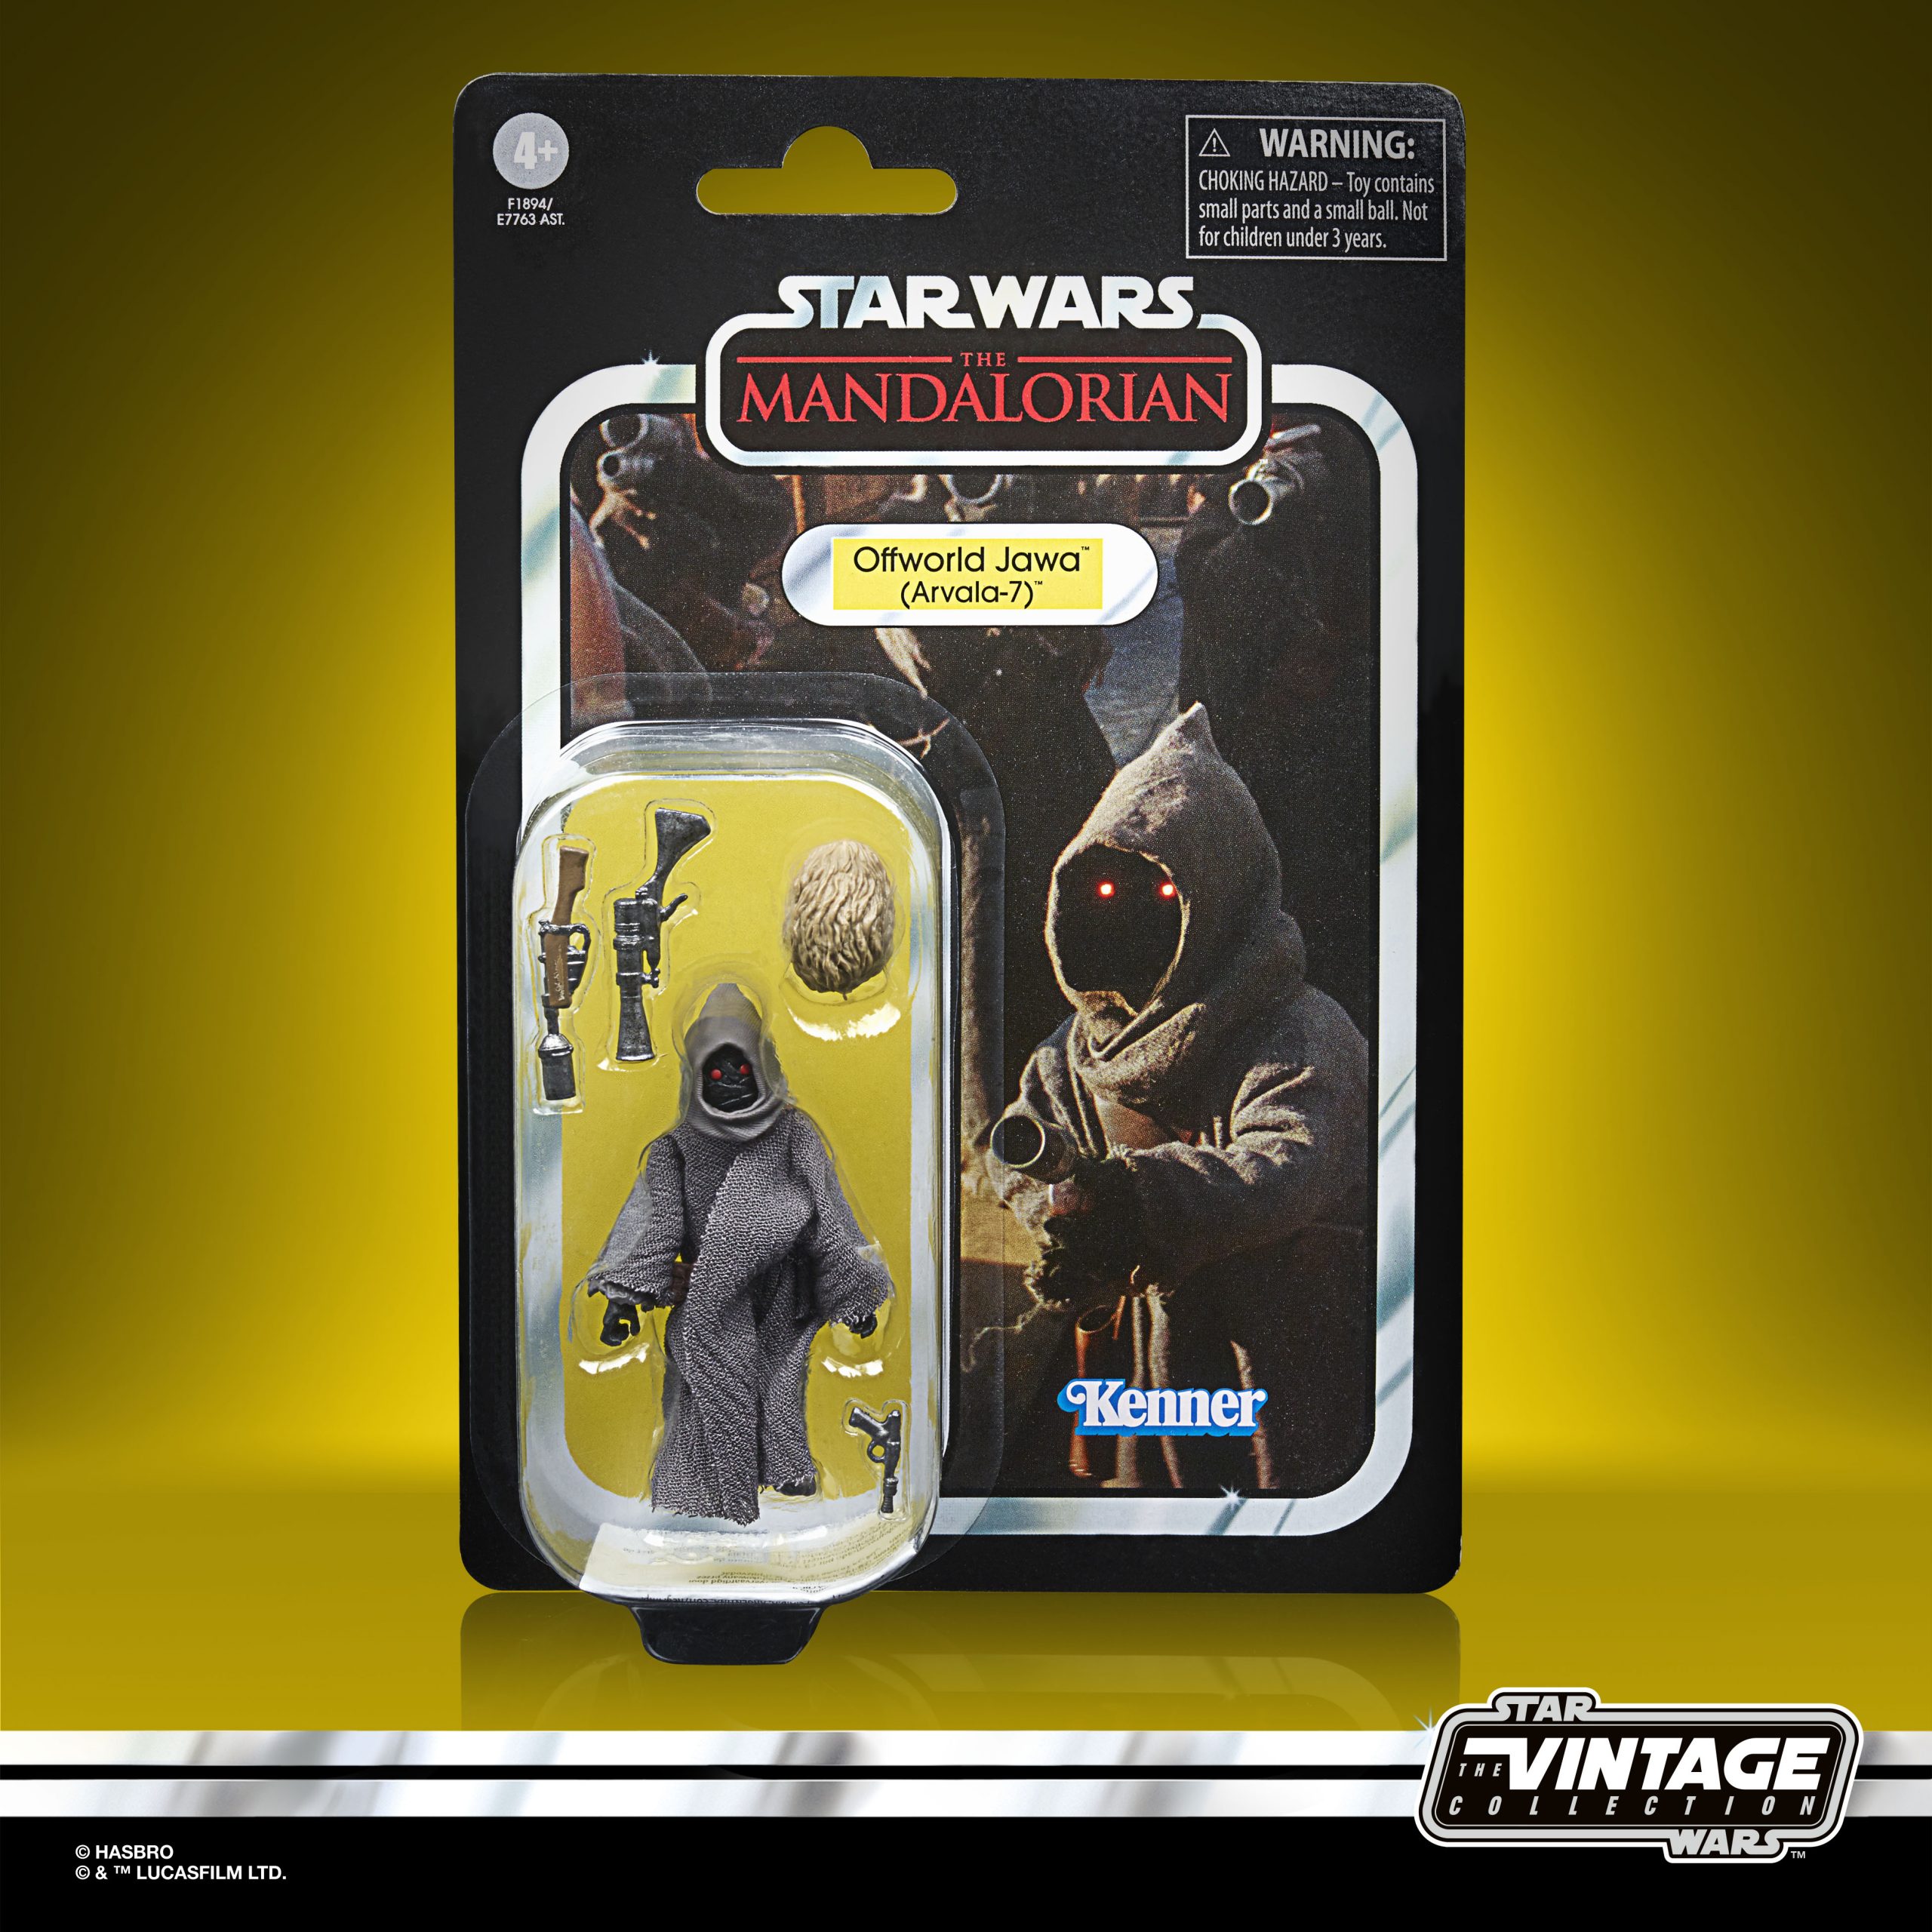 Hasbro Announces 'Star Wars' Celebration Exclusive Figure, Plus New Black  Series and Vintage Collection Items - Star Wars News Net